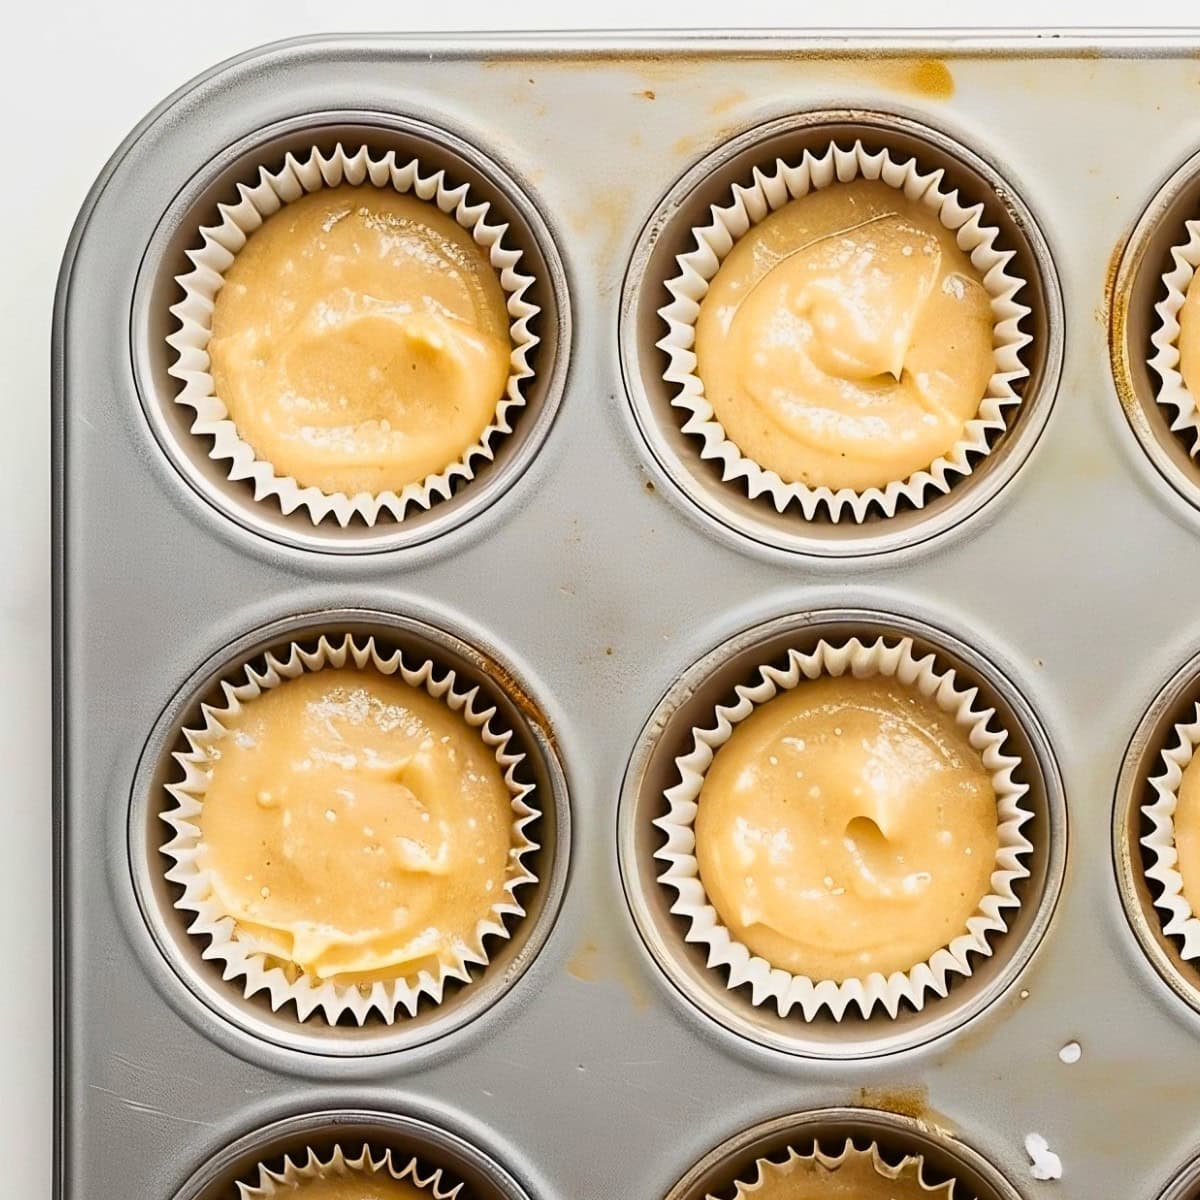 Banana Nut Muffin Batter in Muffin Liners in a Muffin Tin